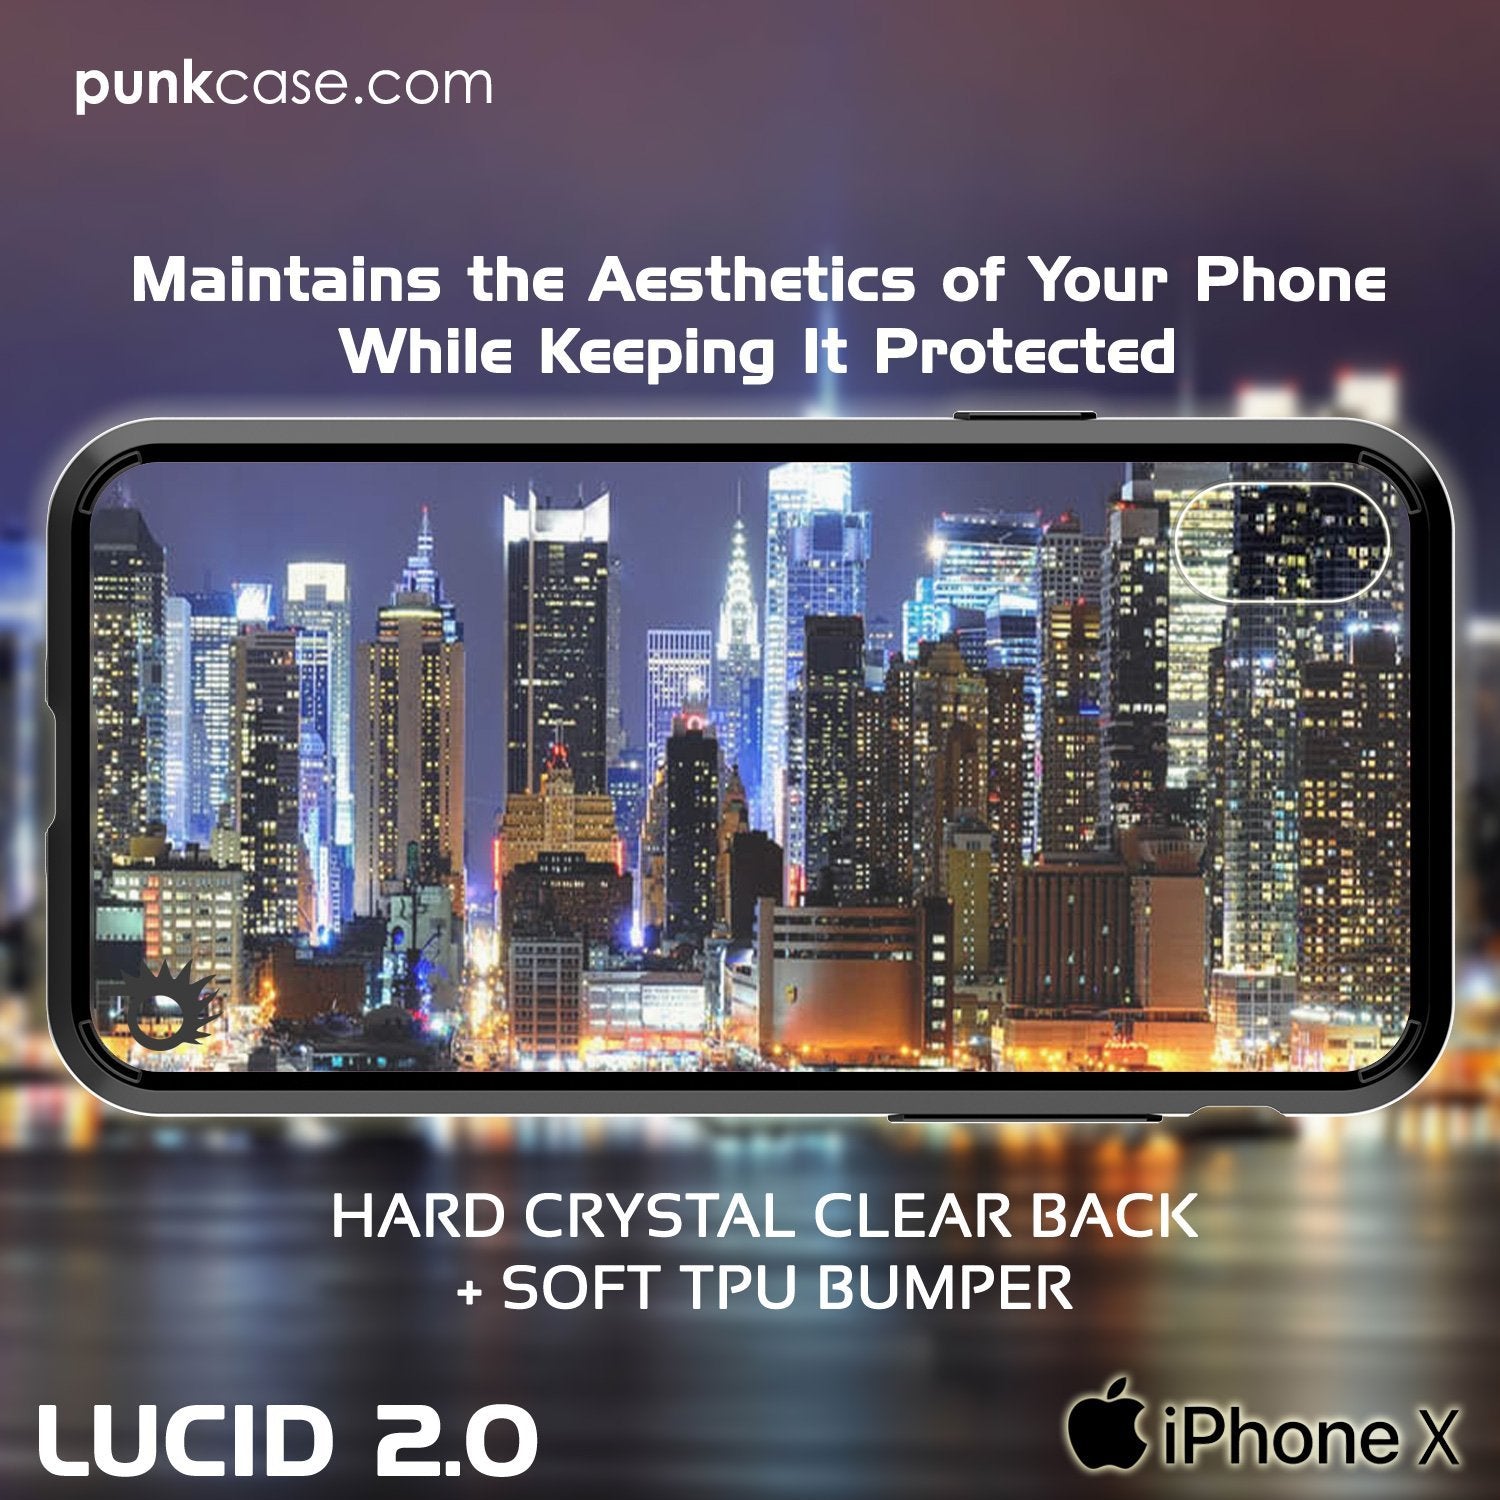 iPhone X Punkcase, [LUCID 2.0 Series] Slim Fit Dual Layer Cover, Black